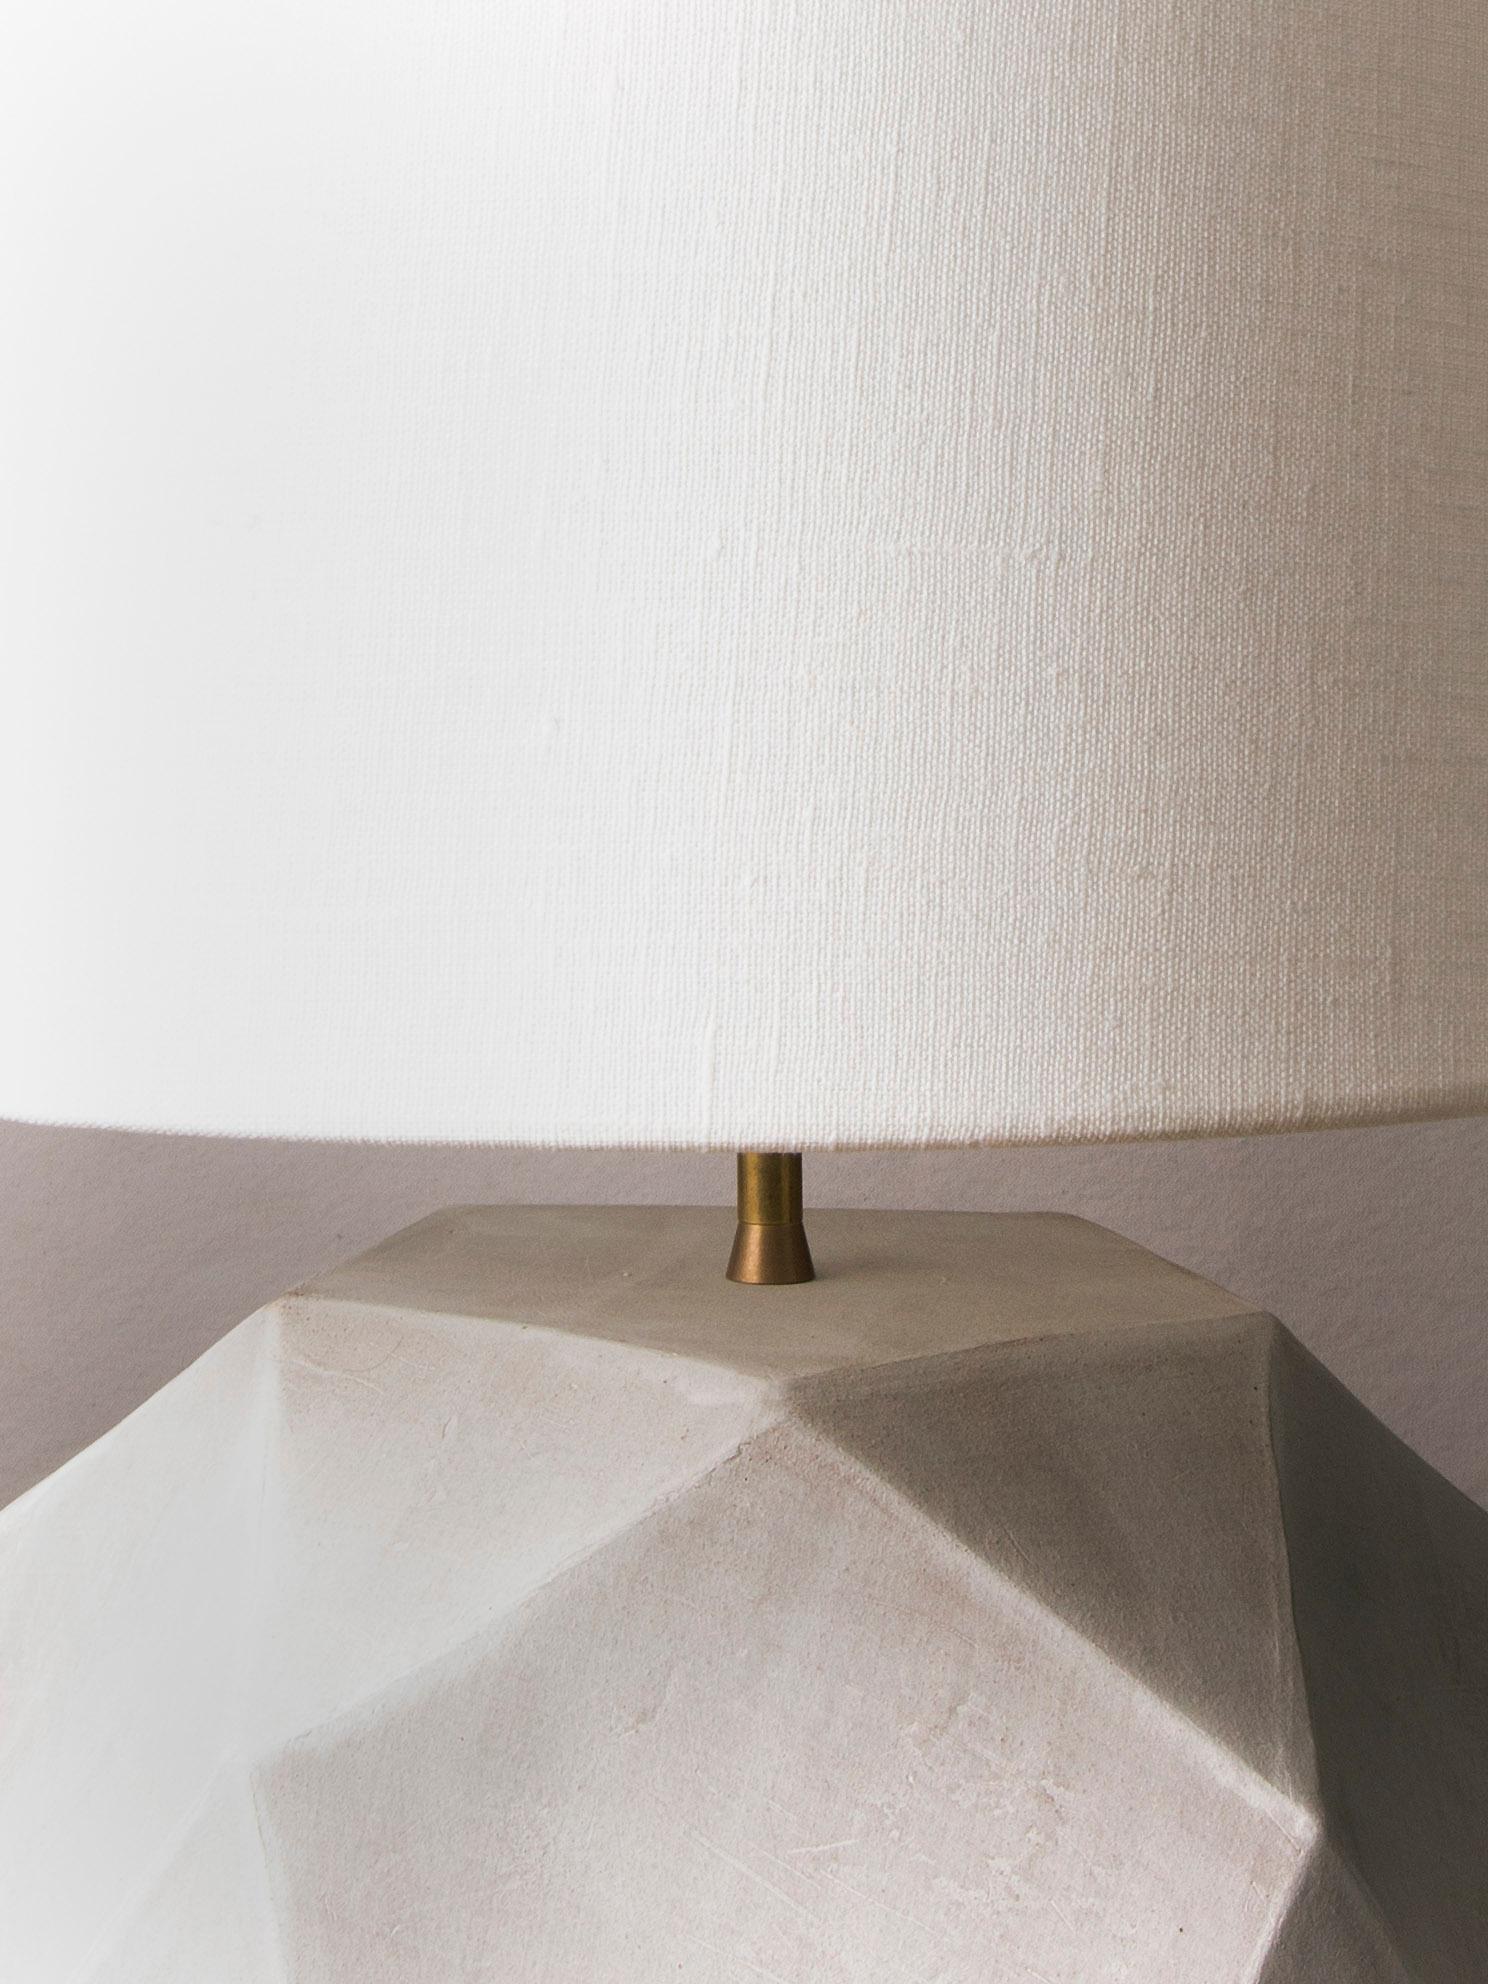 American Geode Lamp 1 - Geometric White Ceramic and Brass Table Lamp #1 For Sale